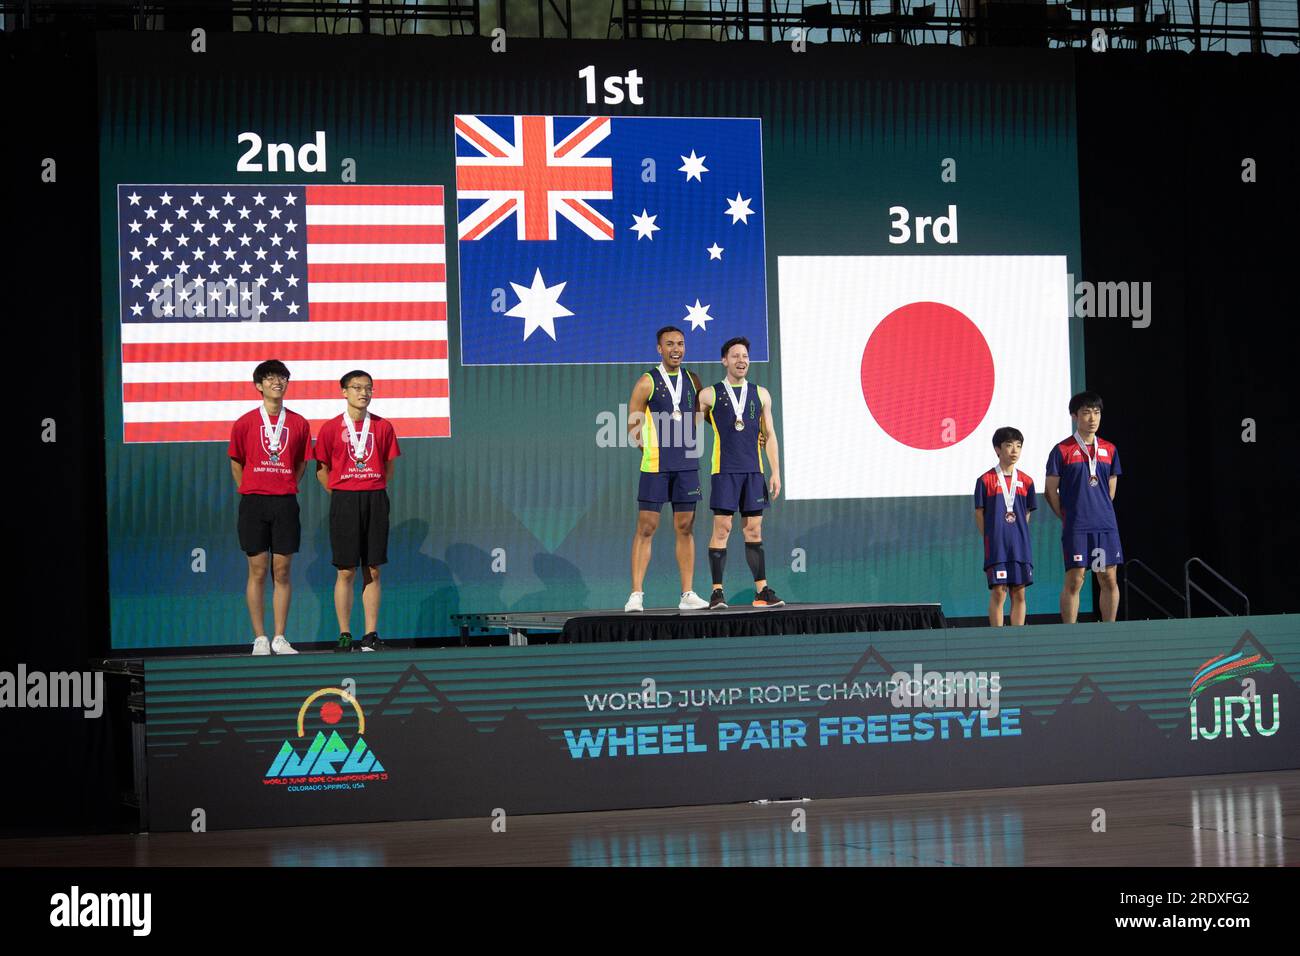 World Jump Rope Championship Finals, Colorado Springs, Colorado, USA. 23rd July, 2023. Men's wheel pair freestyle competition. Podium from L-R, USA in second, Australia team of Boon and Cooper in first, and Japan in third place. Credit: Casey B. Gibson/Alamy Live News Stock Photo